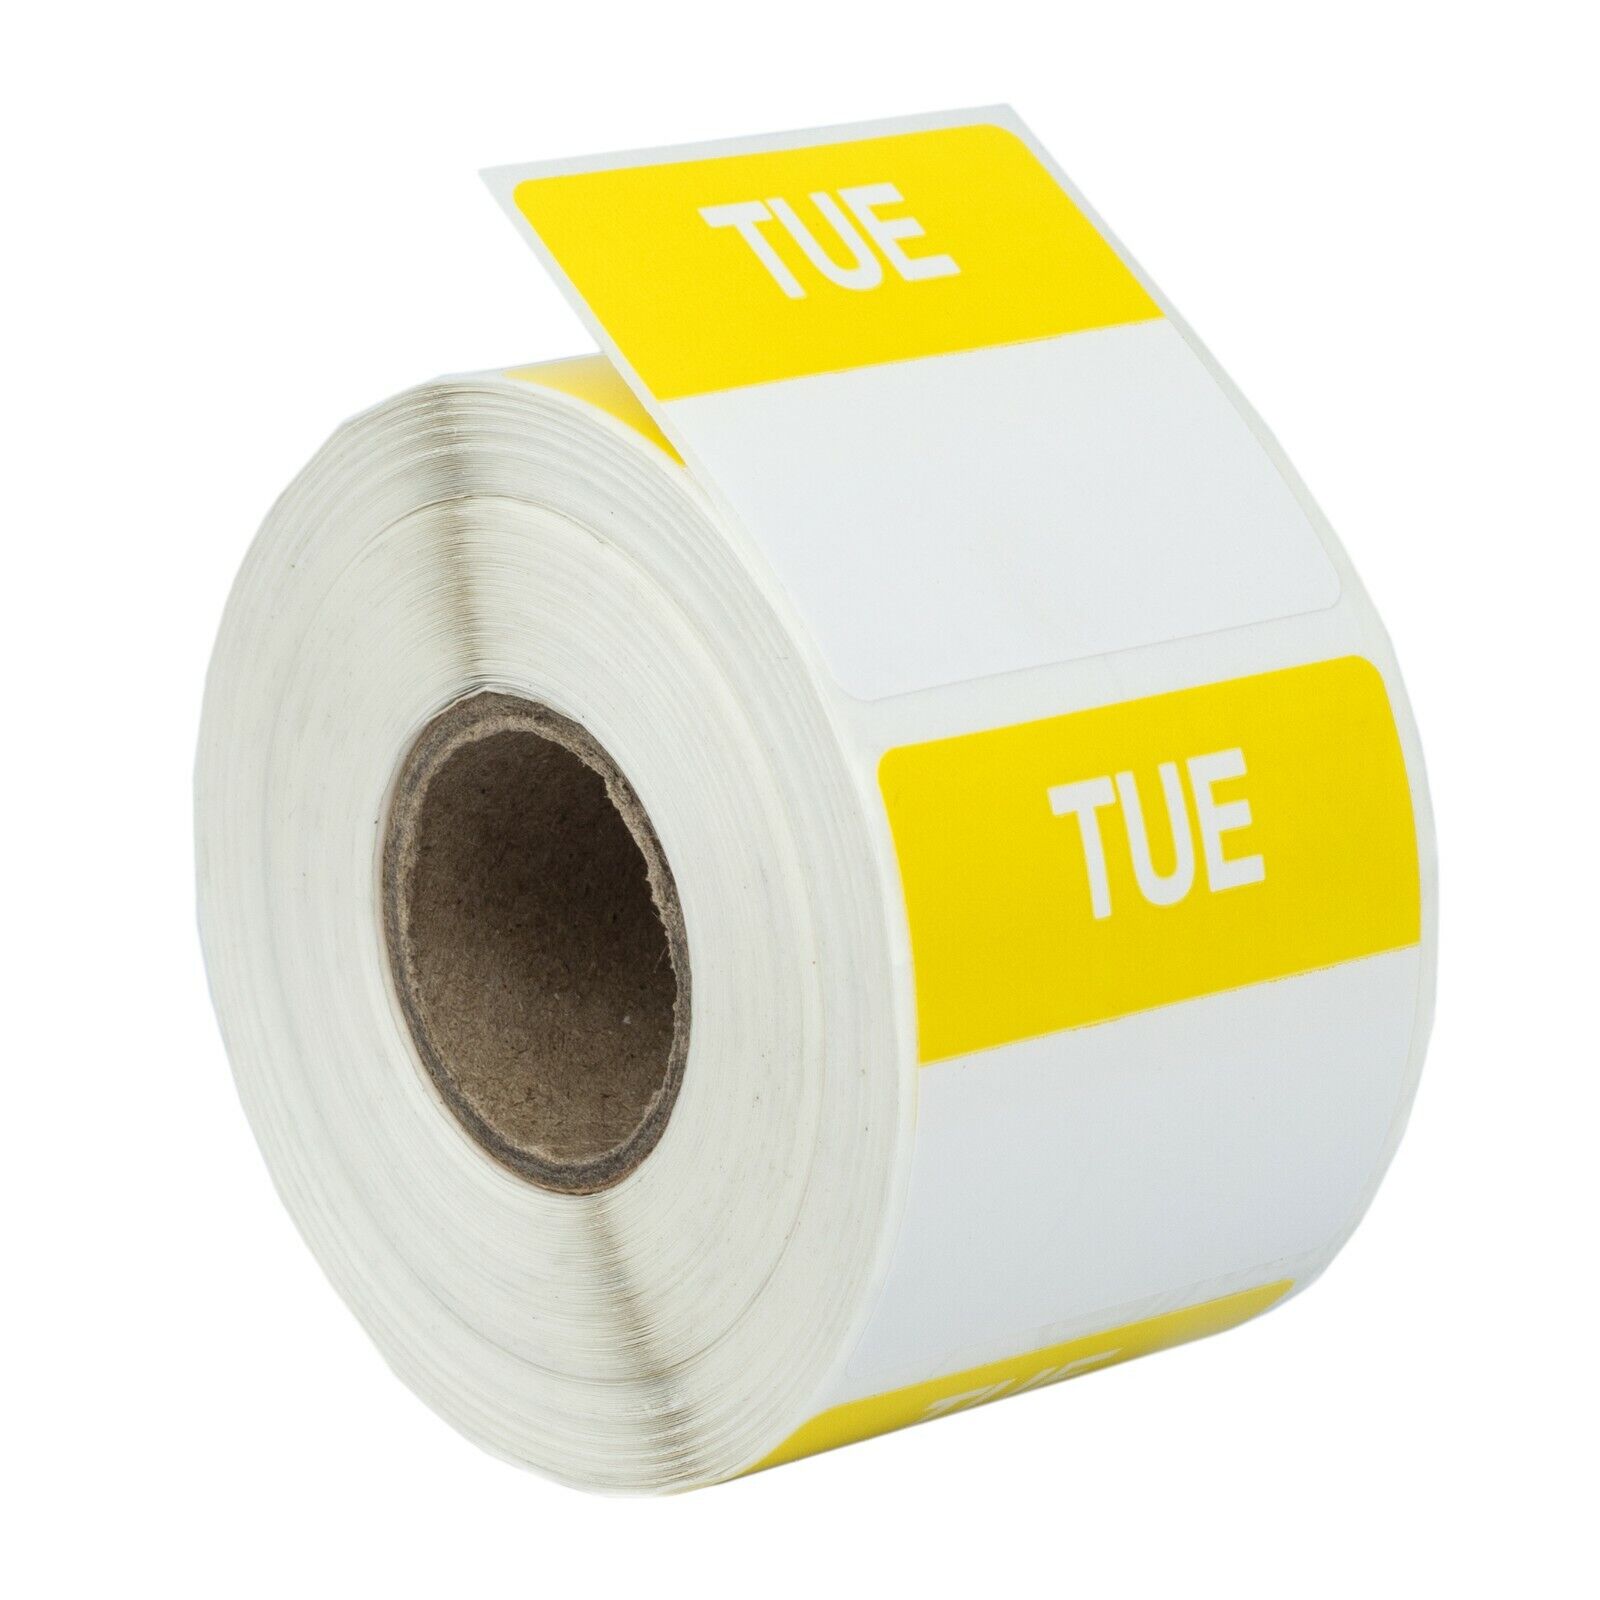 BUSINESS DAY OF THE WEEK Labels - (50) Roll Combo Pack - (10) Rolls of 500/Day